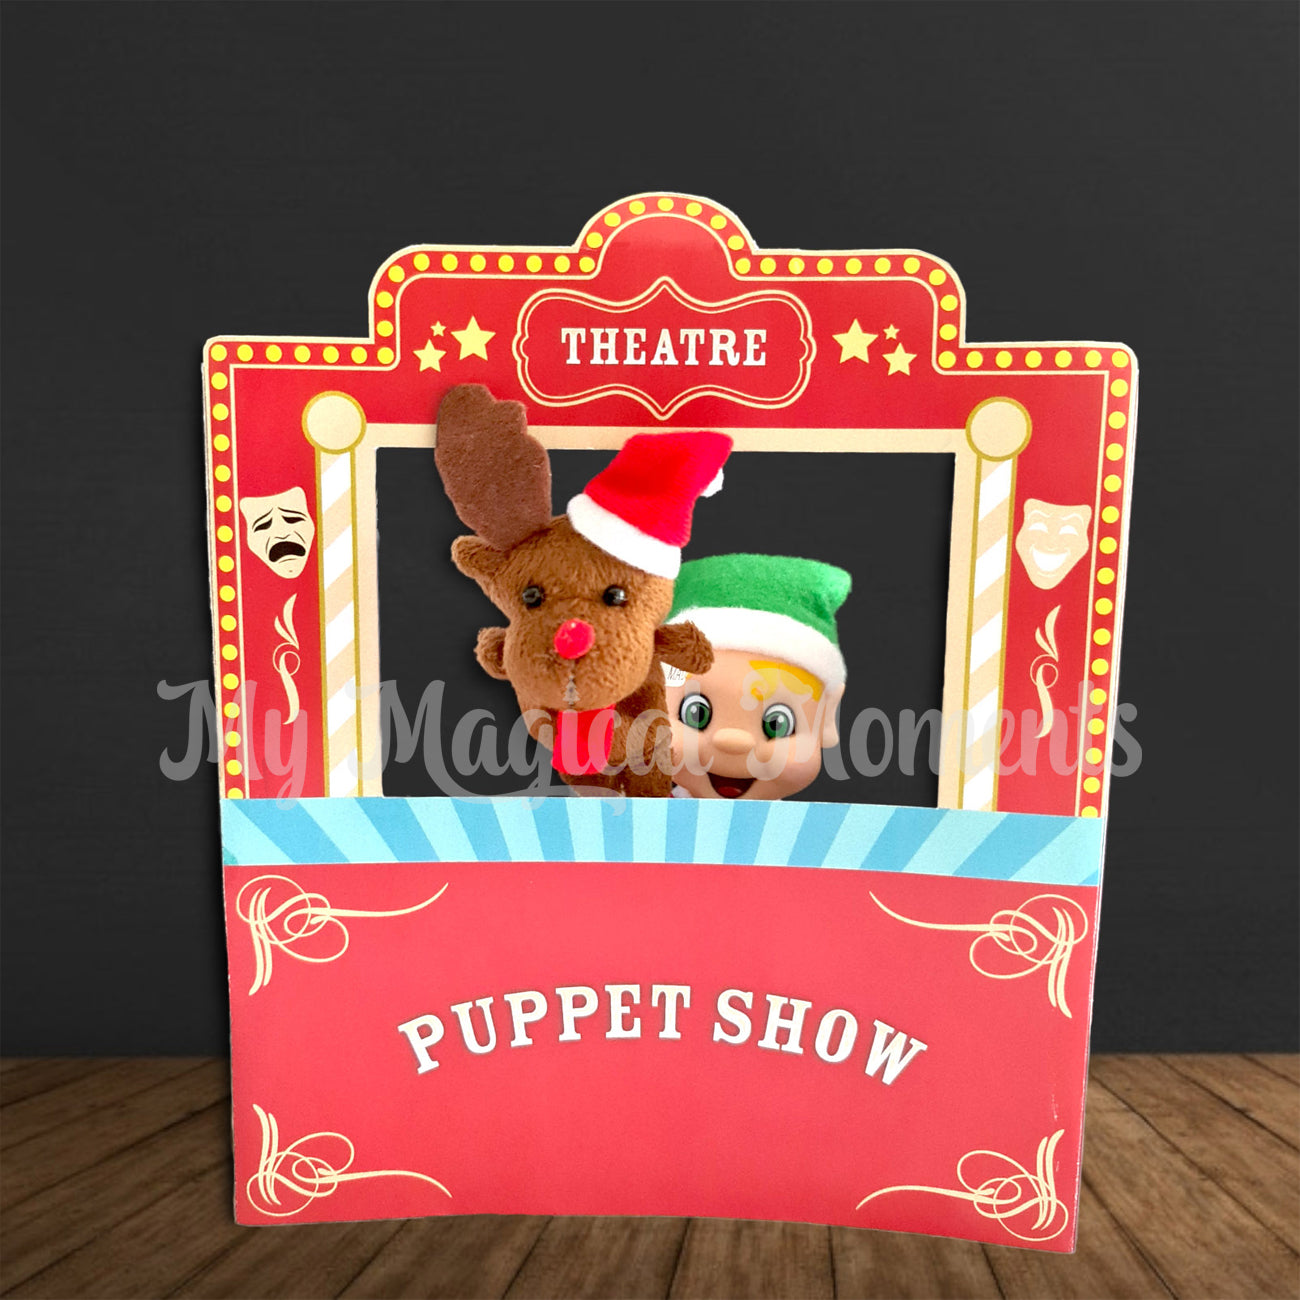 Elf putting on a puppet show